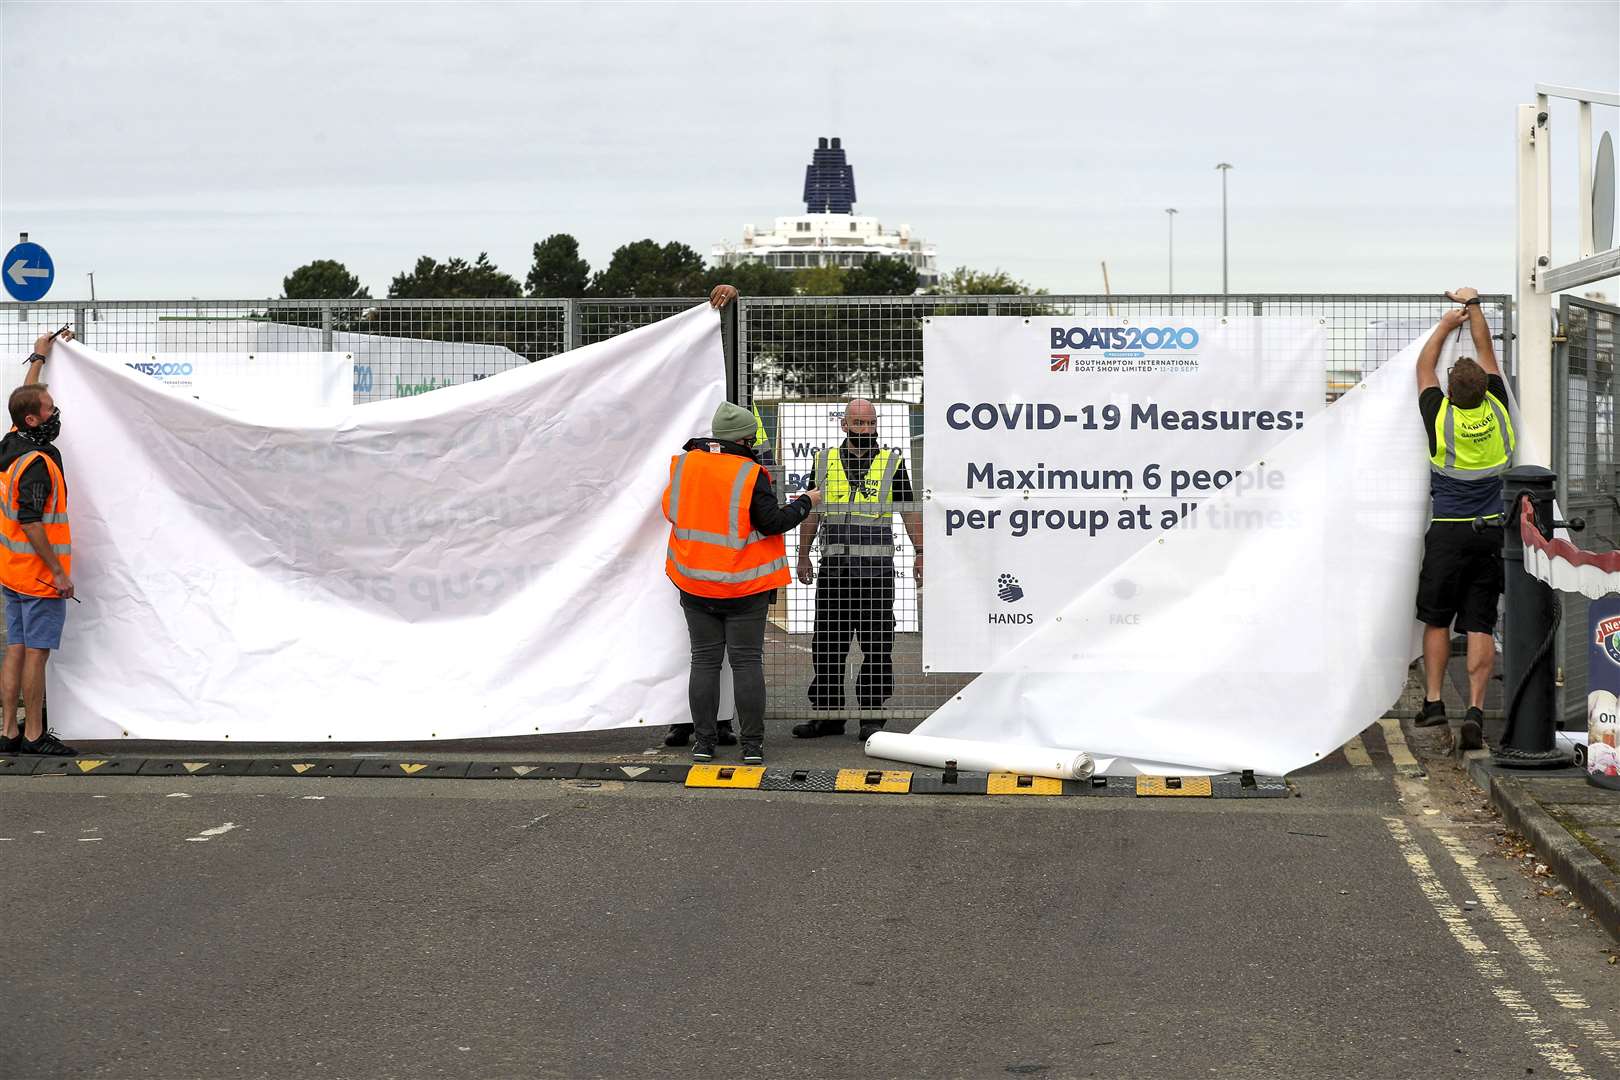 Staff put up screens at the BOATS2020 show in Southampton following cancellation (Steve Parsons/PA)